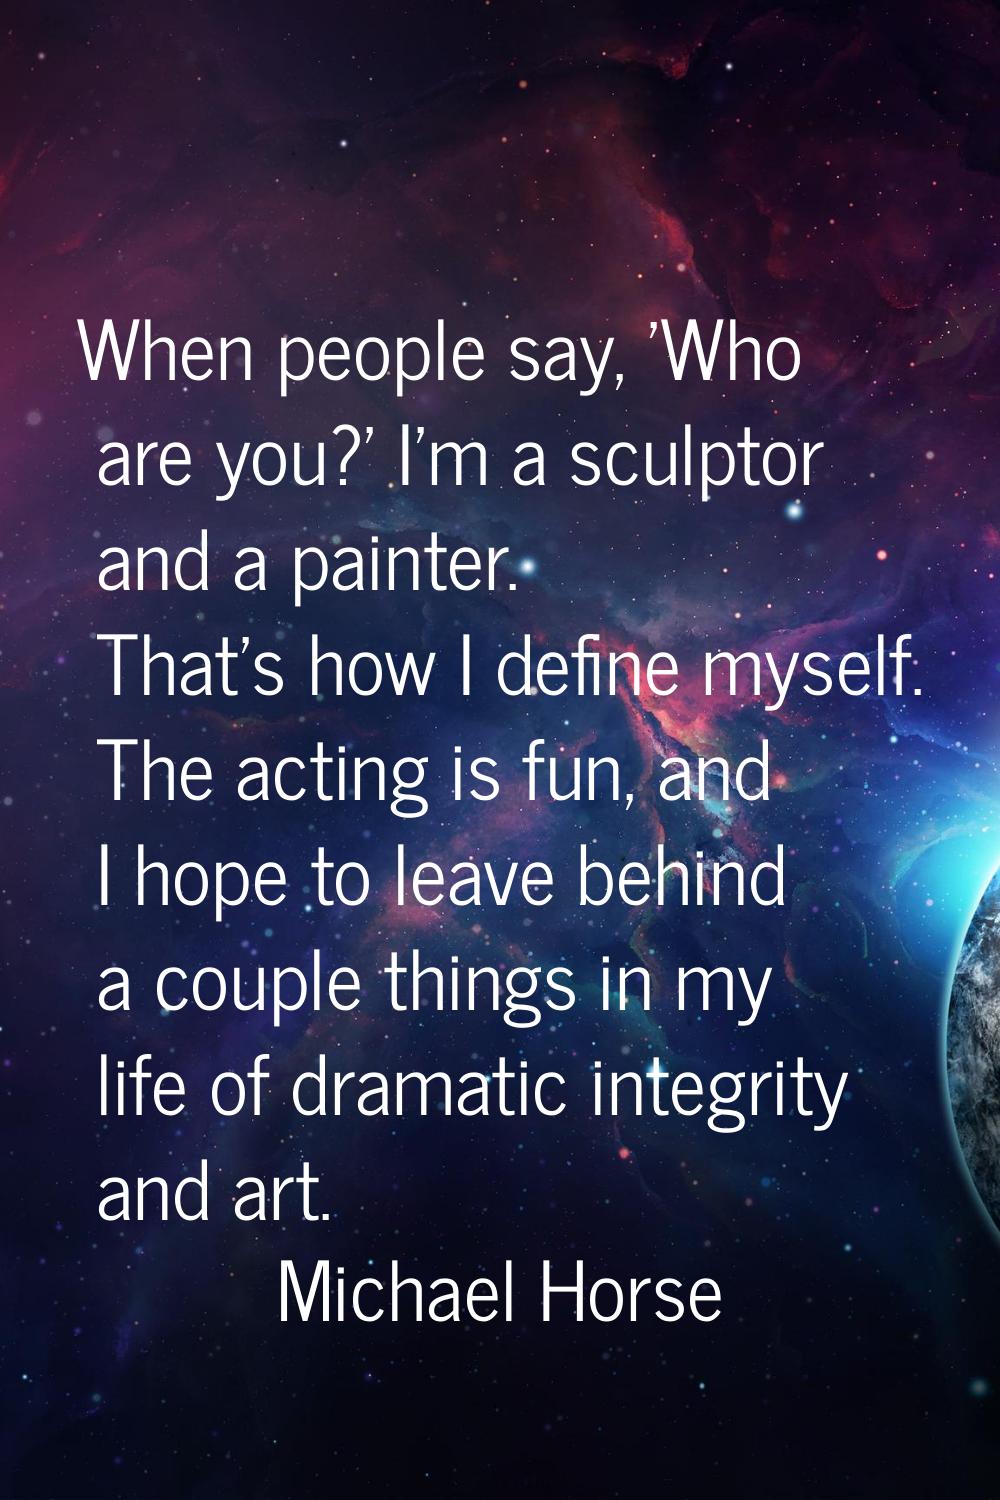 When people say, 'Who are you?' I'm a sculptor and a painter. That's how I define myself. The actin